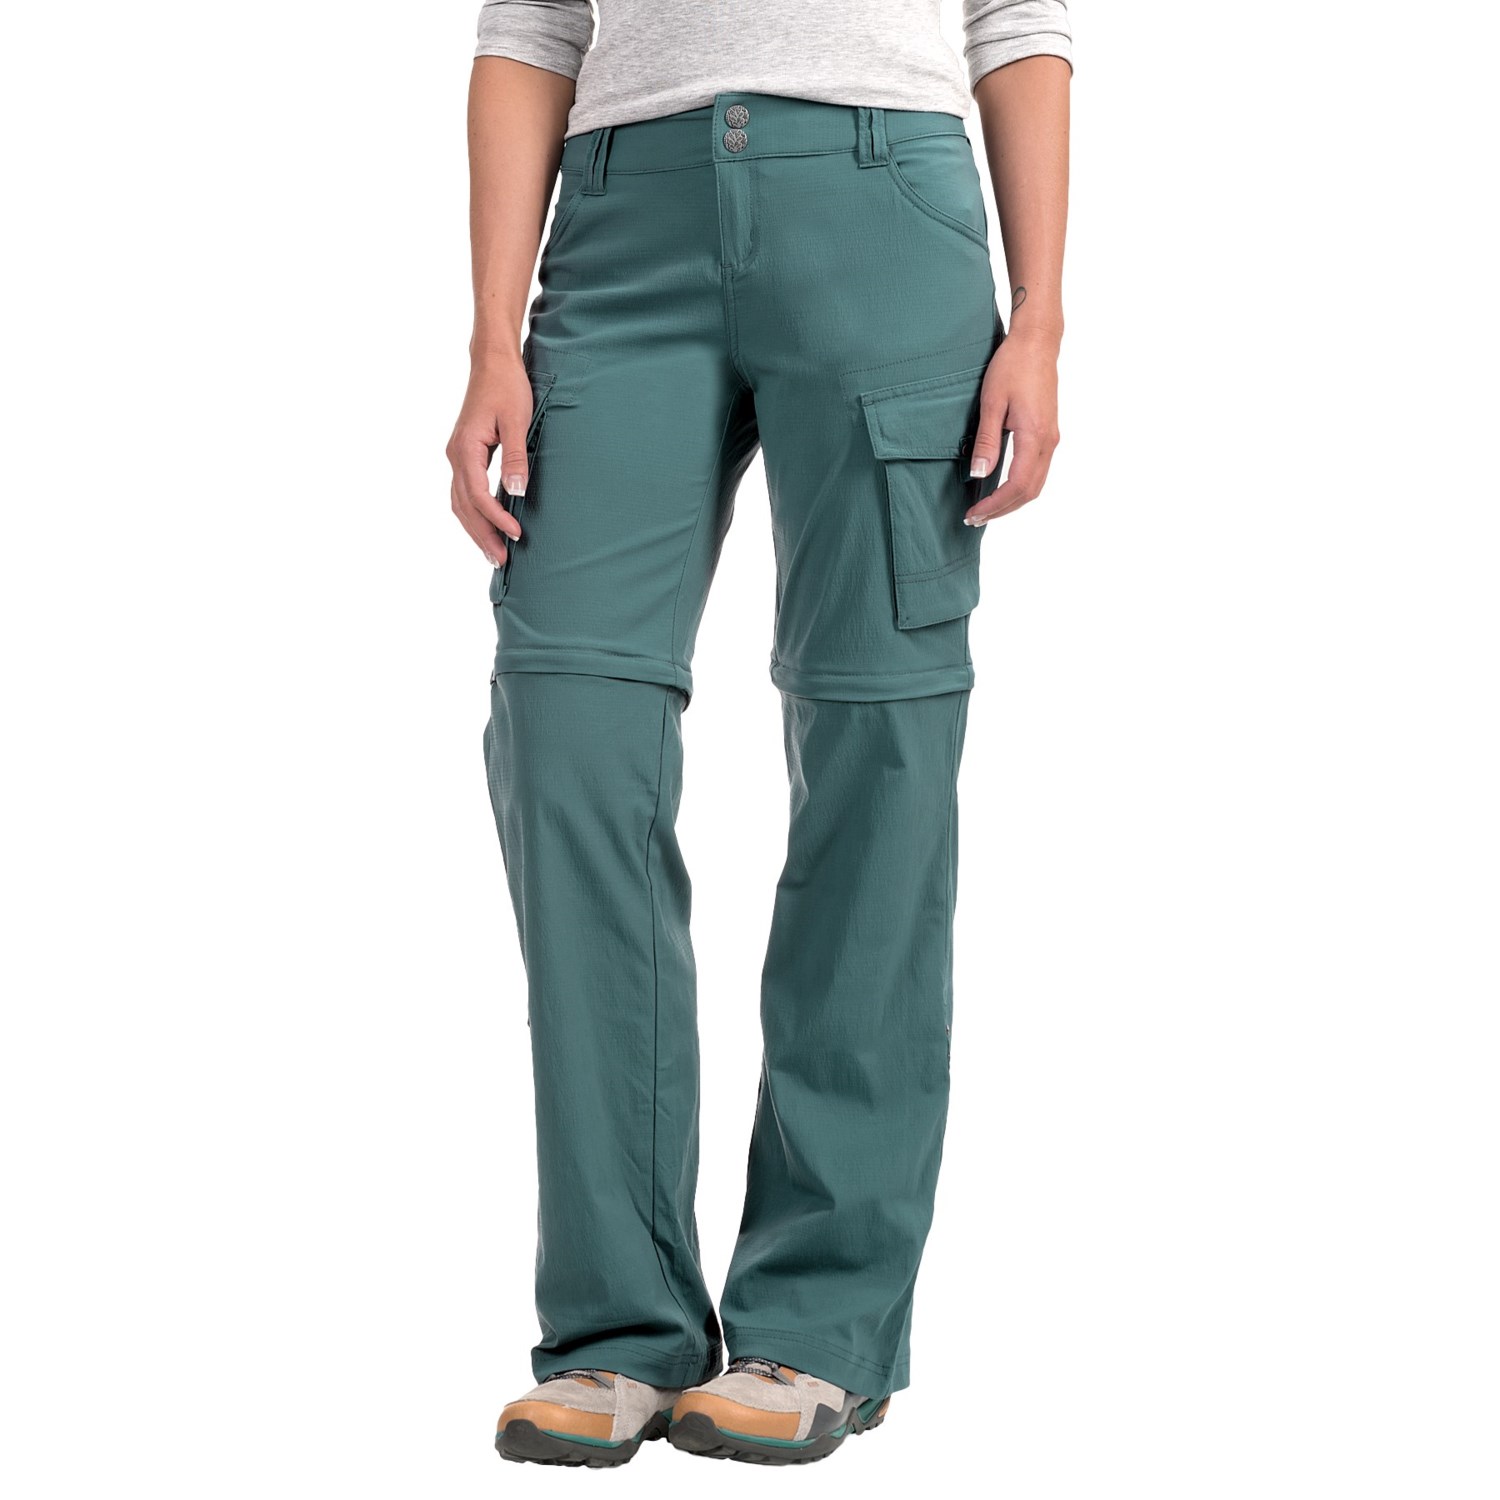 prAna Stretch Halle Pants – Water Resistant (For Women)